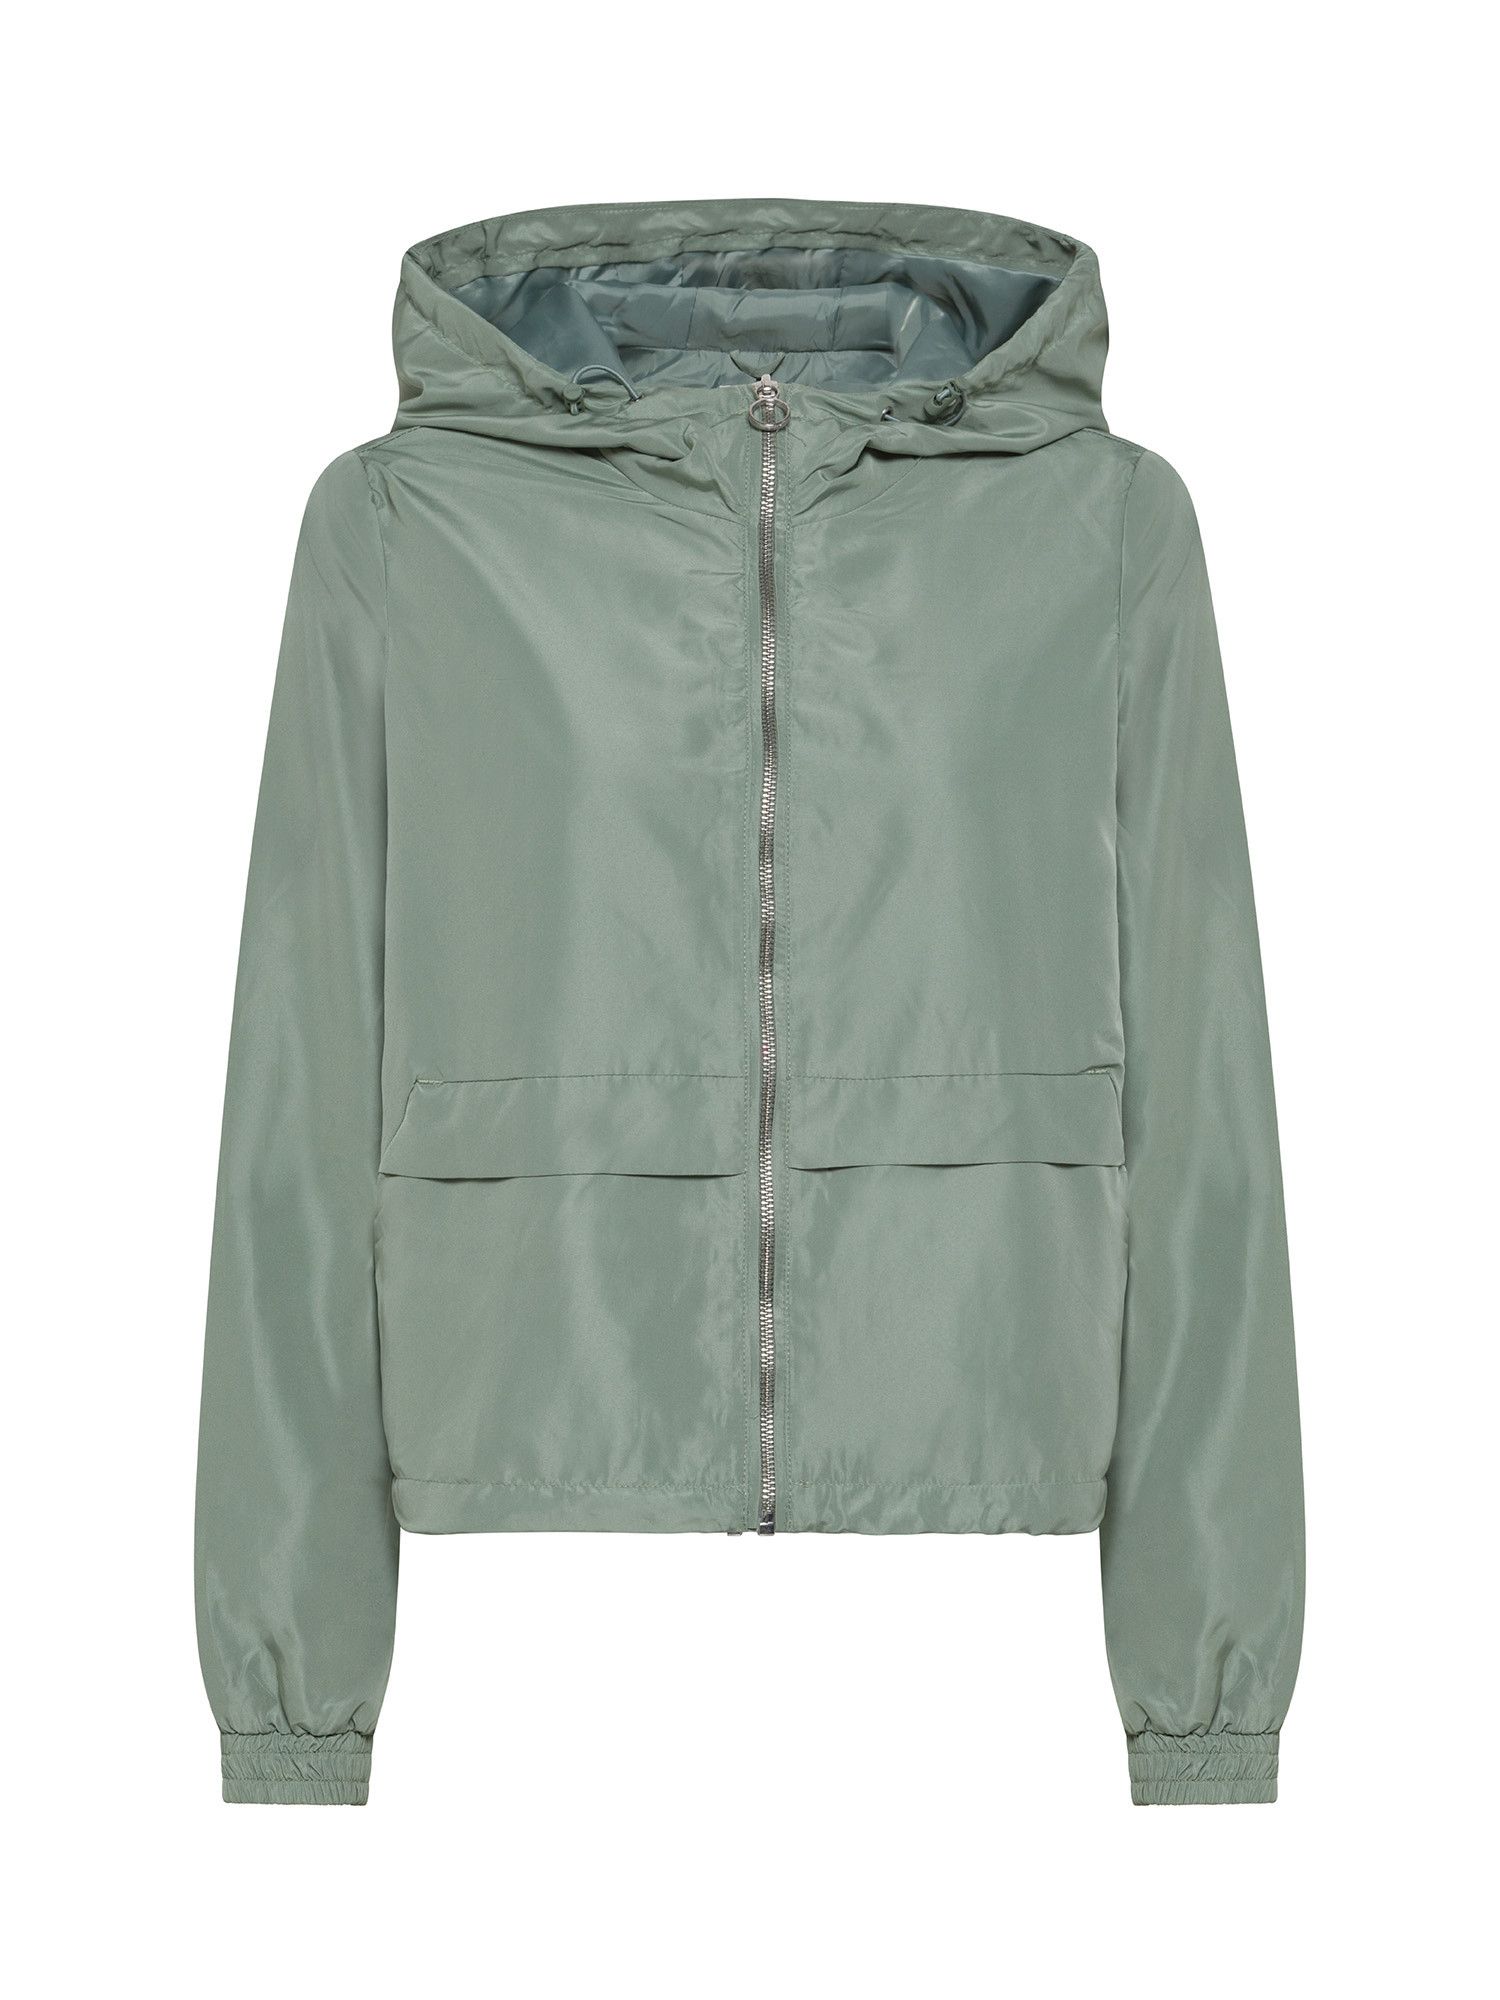 Only - Jacket with zip, Olive Green, large image number 0